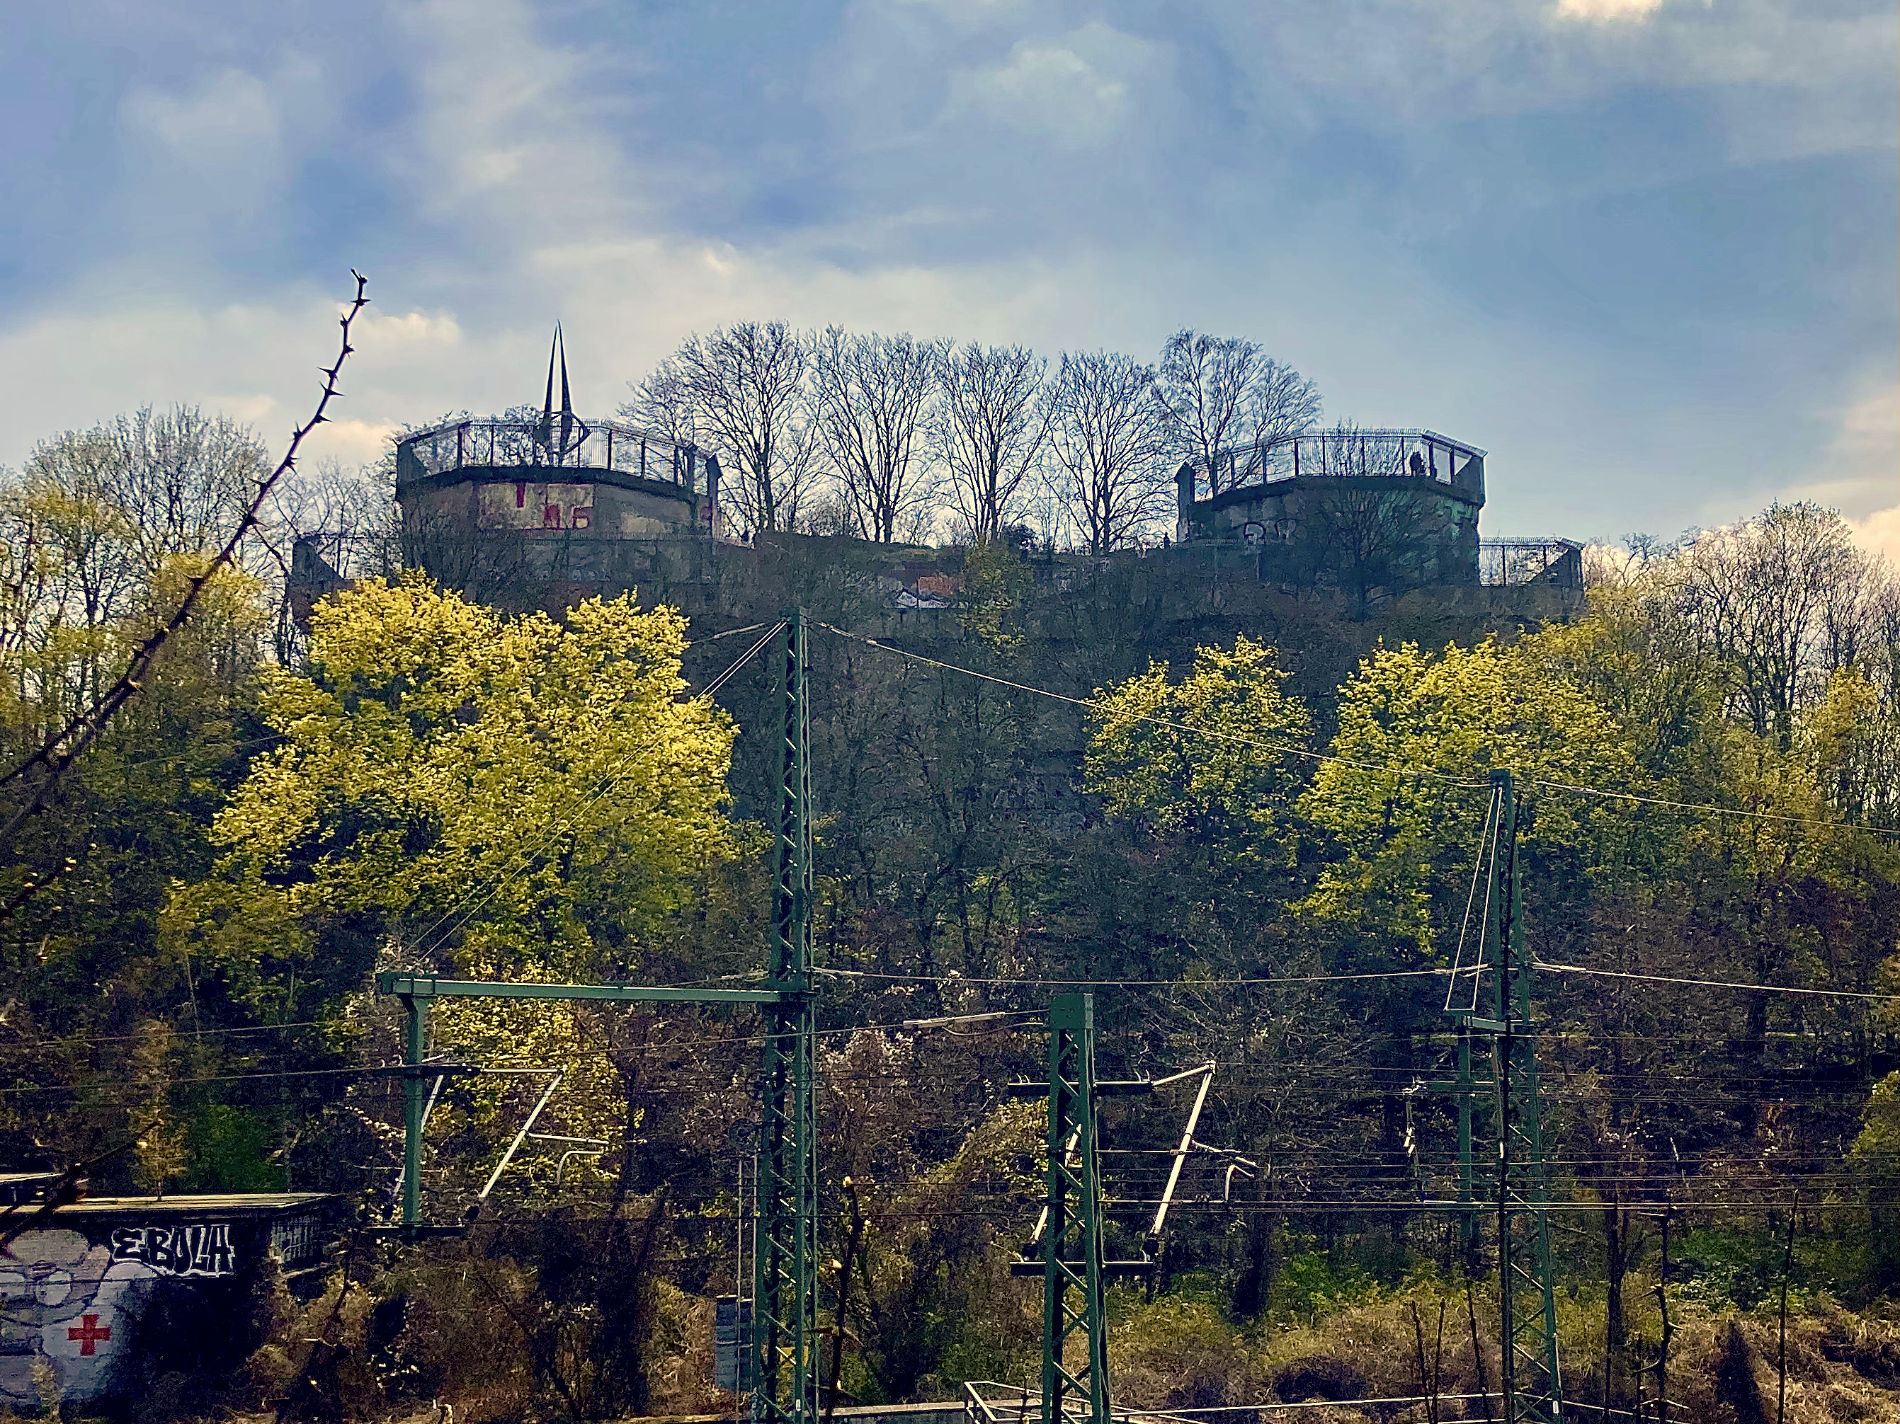 The flak tower rises above the trees next to the railroad.